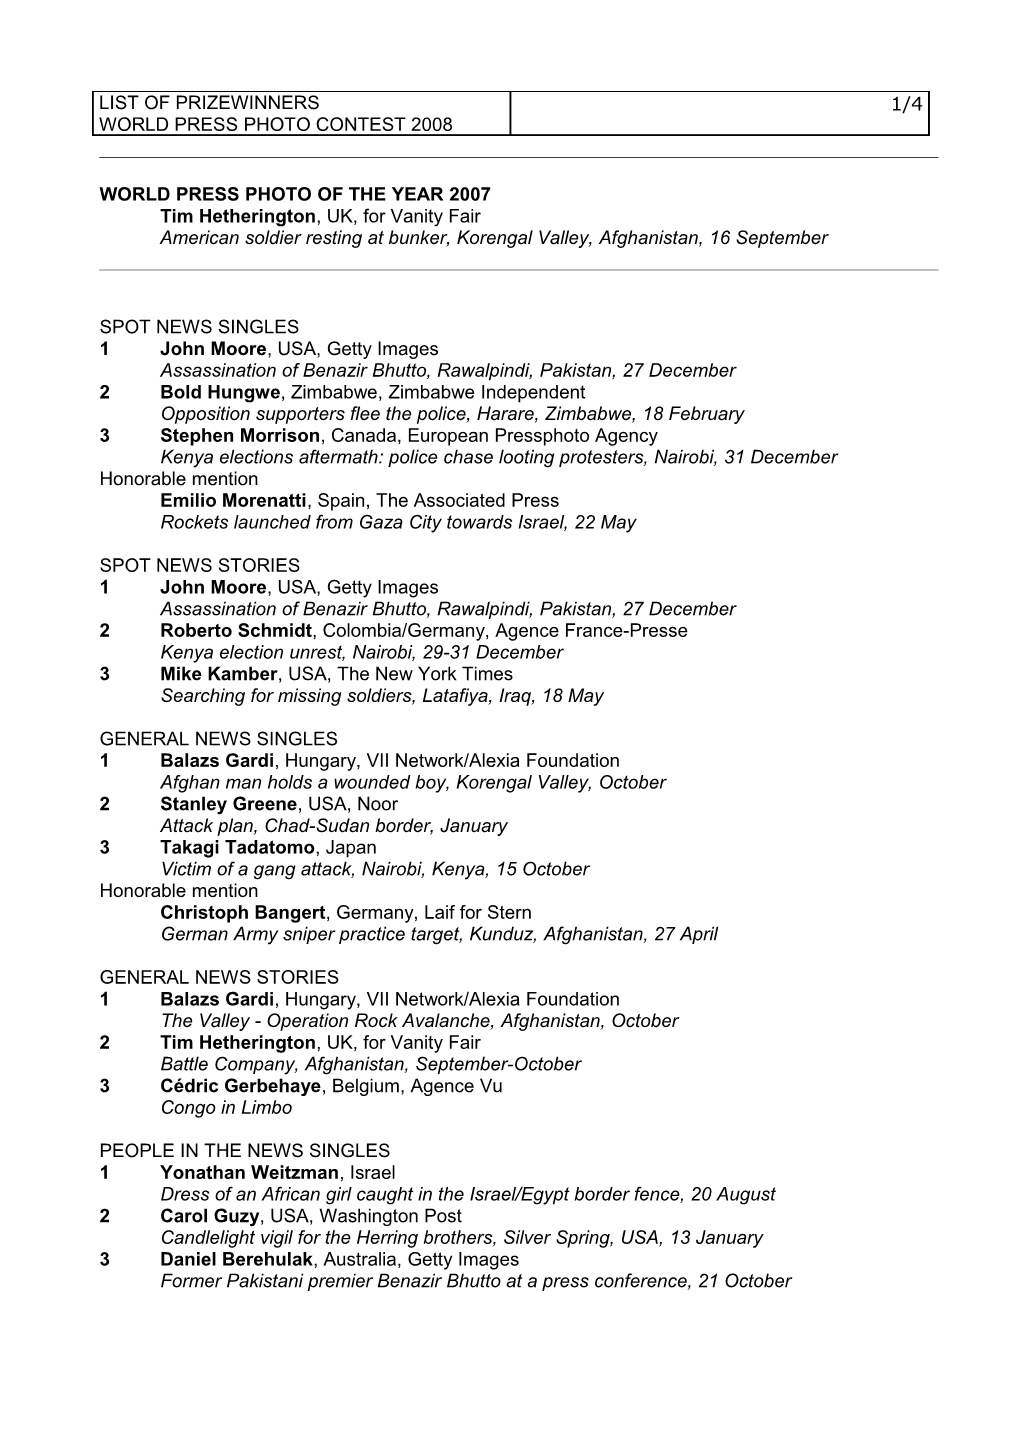 List of Prizewinners Contest 1999